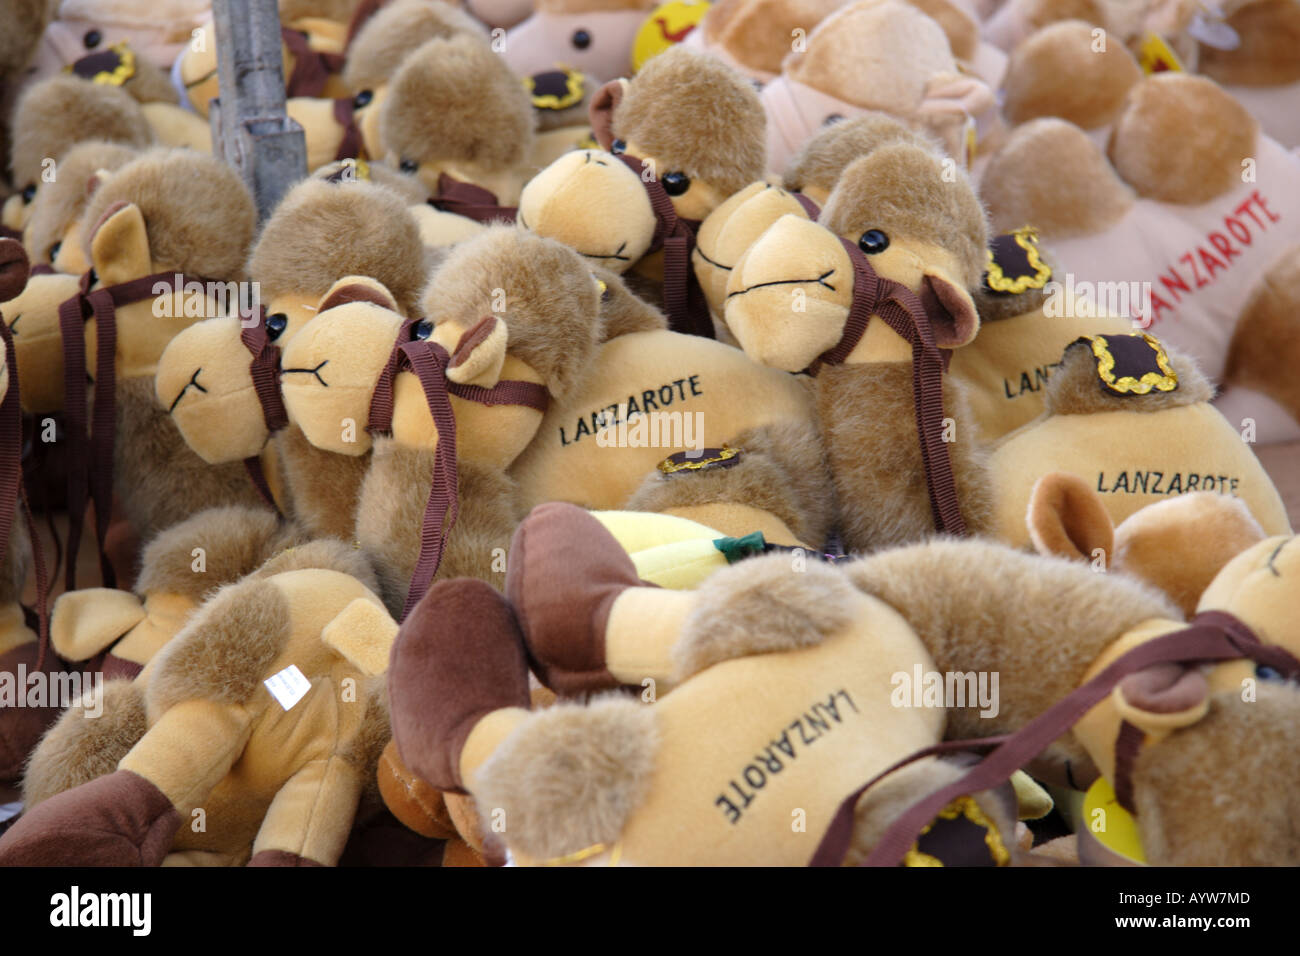 Stuffed camels in Lanzarote Stock Photo